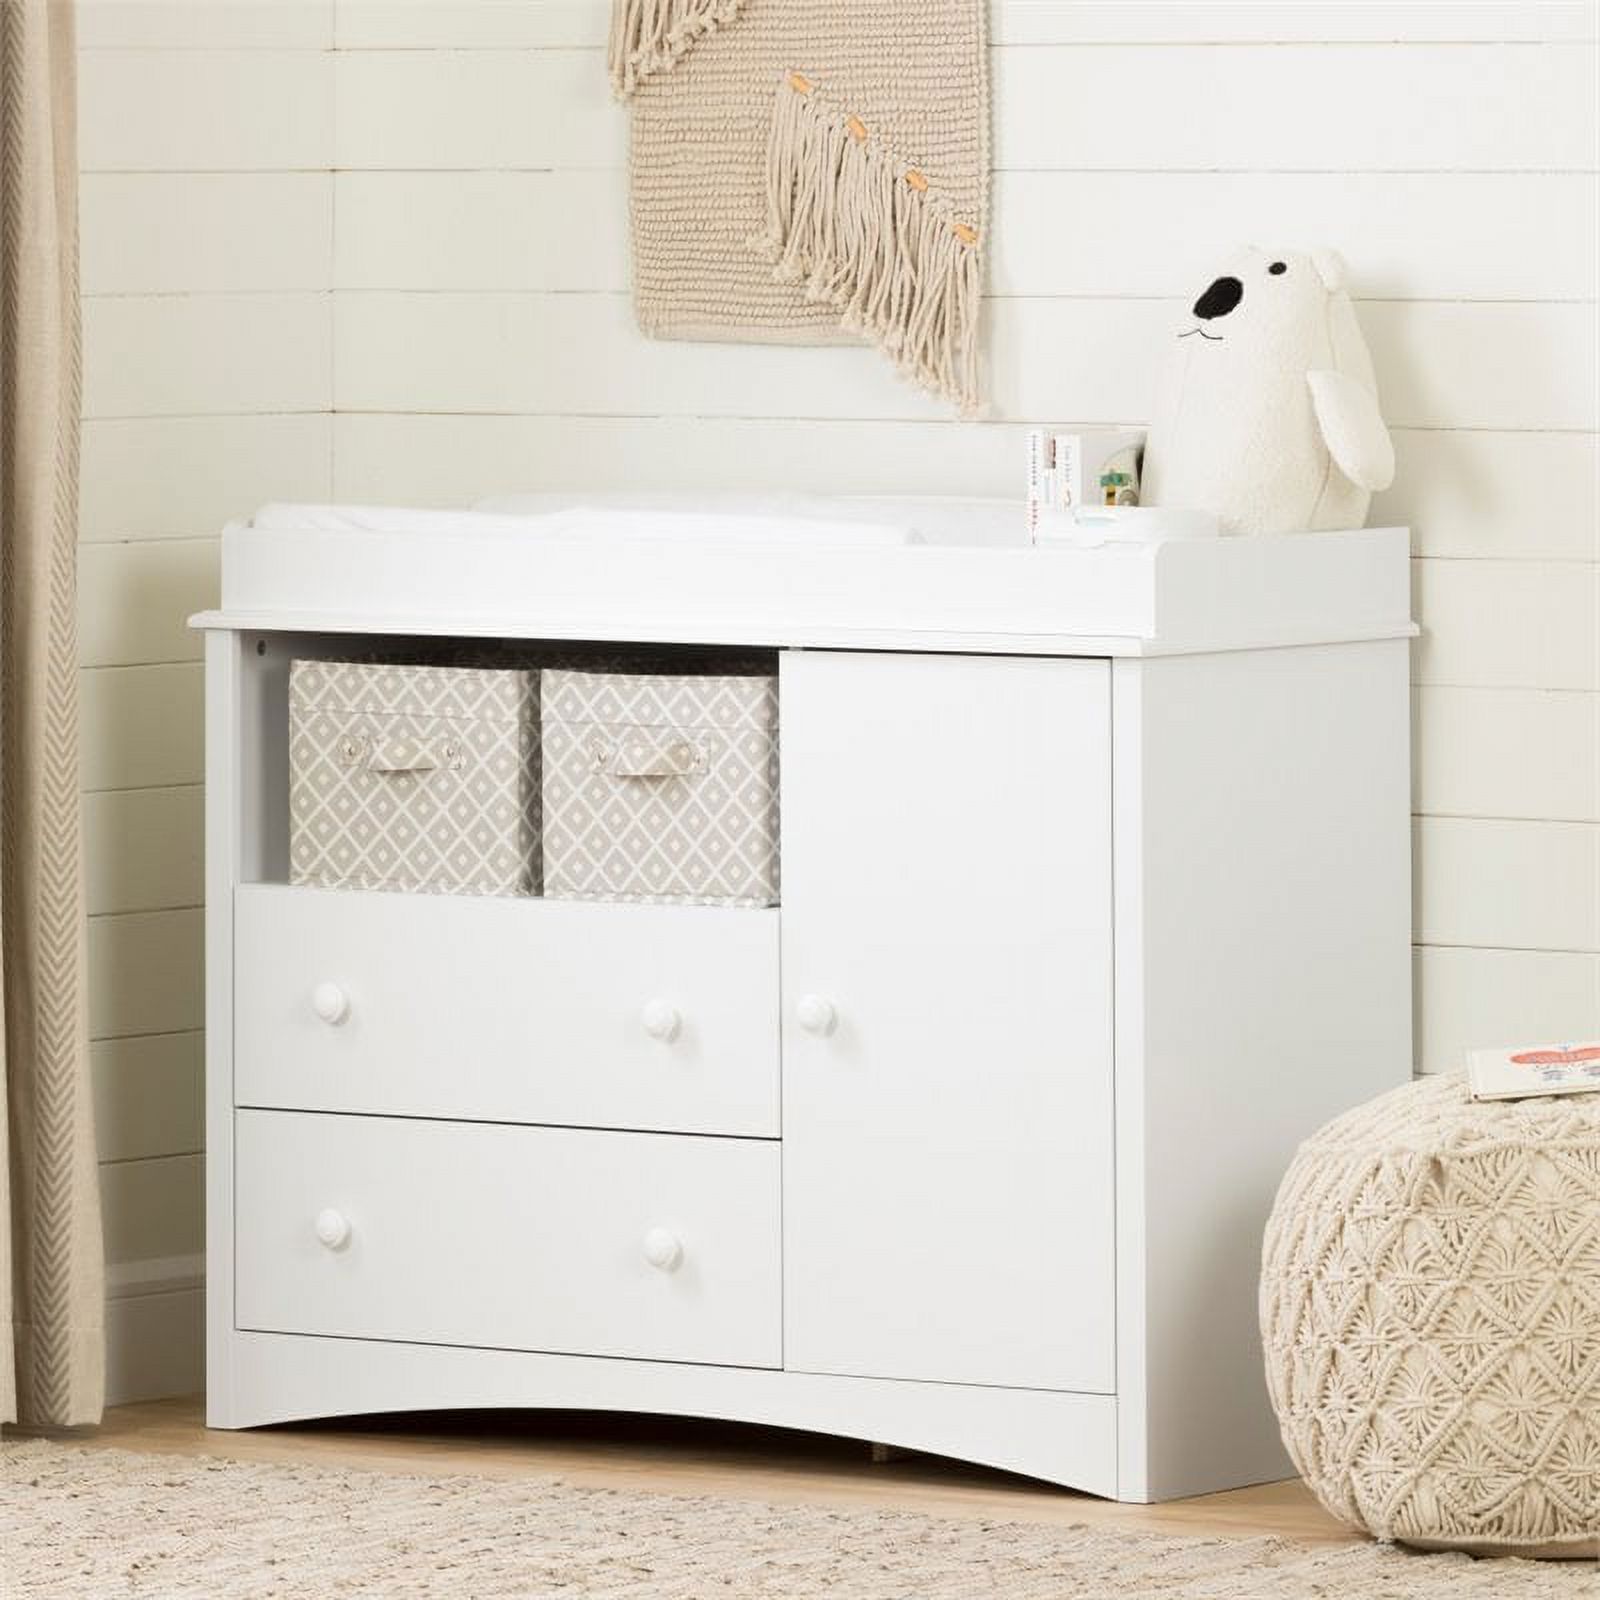 South Shore Furniture South Shore Peek-a-boo Changing Table, Pure White - image 2 of 4